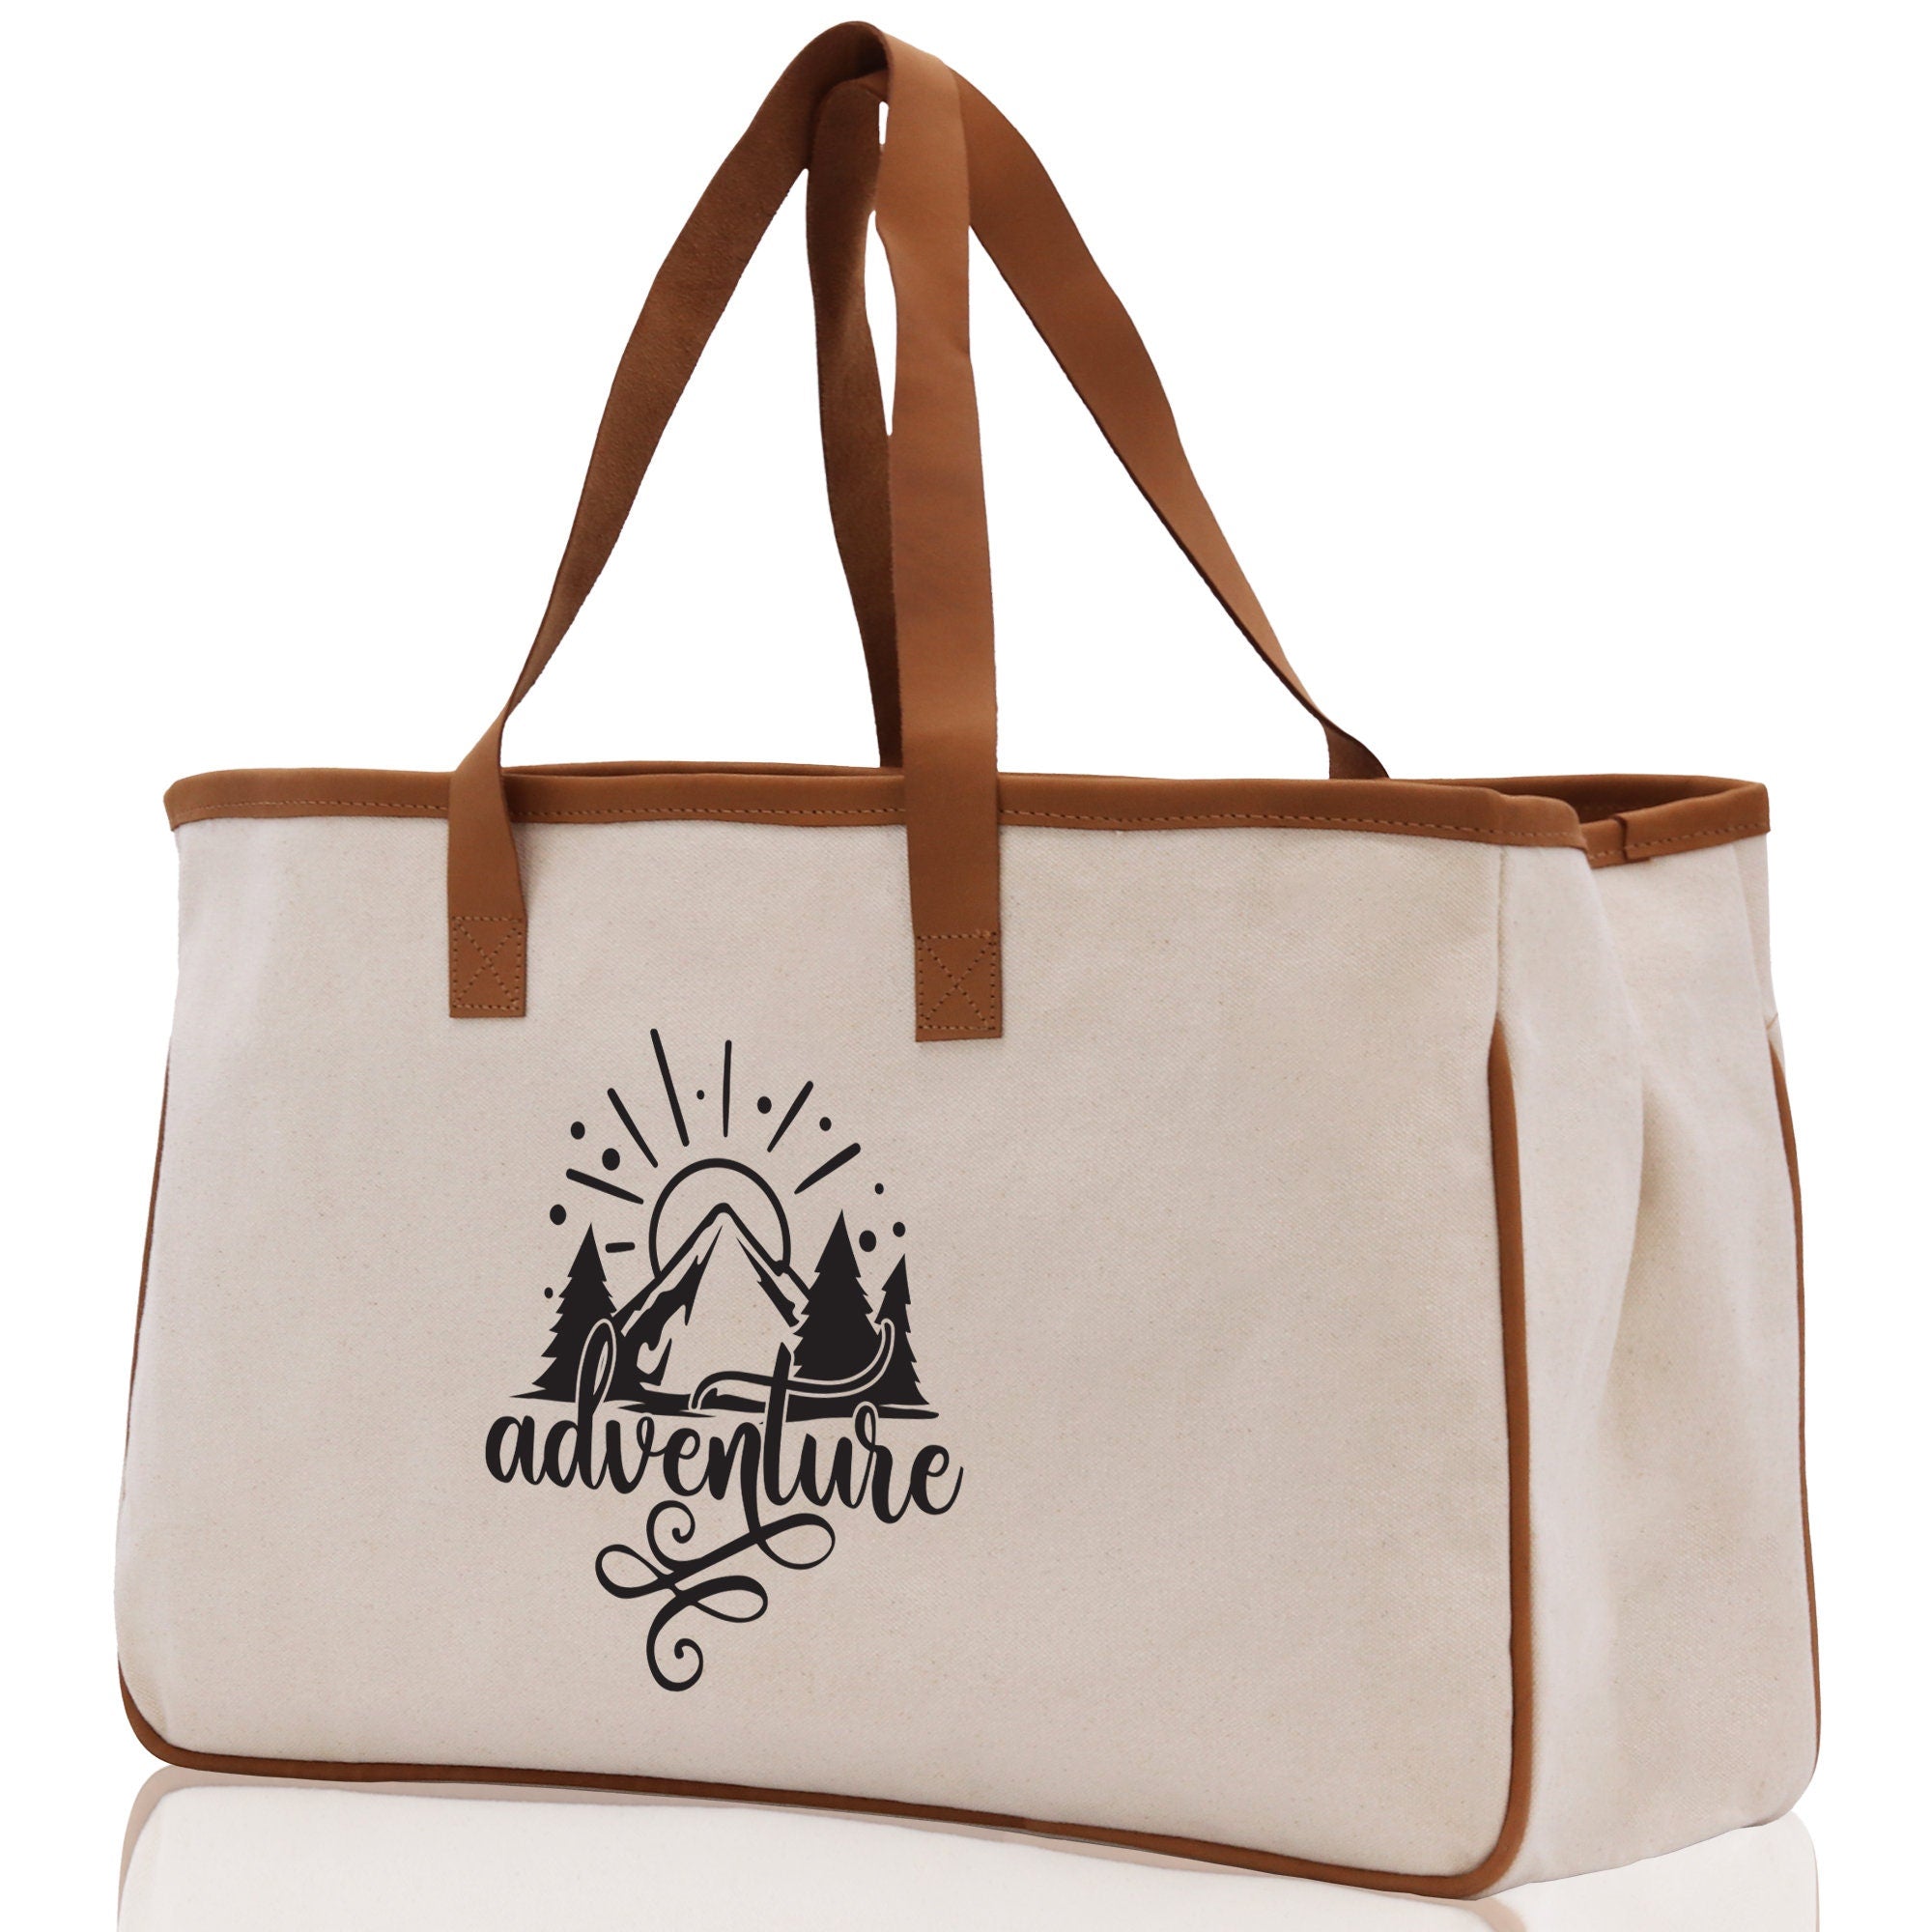 Adventure Cotton Canvas Chic Tote Bag Camping Tote Camping Lover Gift Tote Bag Outdoor Tote Weekender Tote Camper Tote Multipurpose Tote